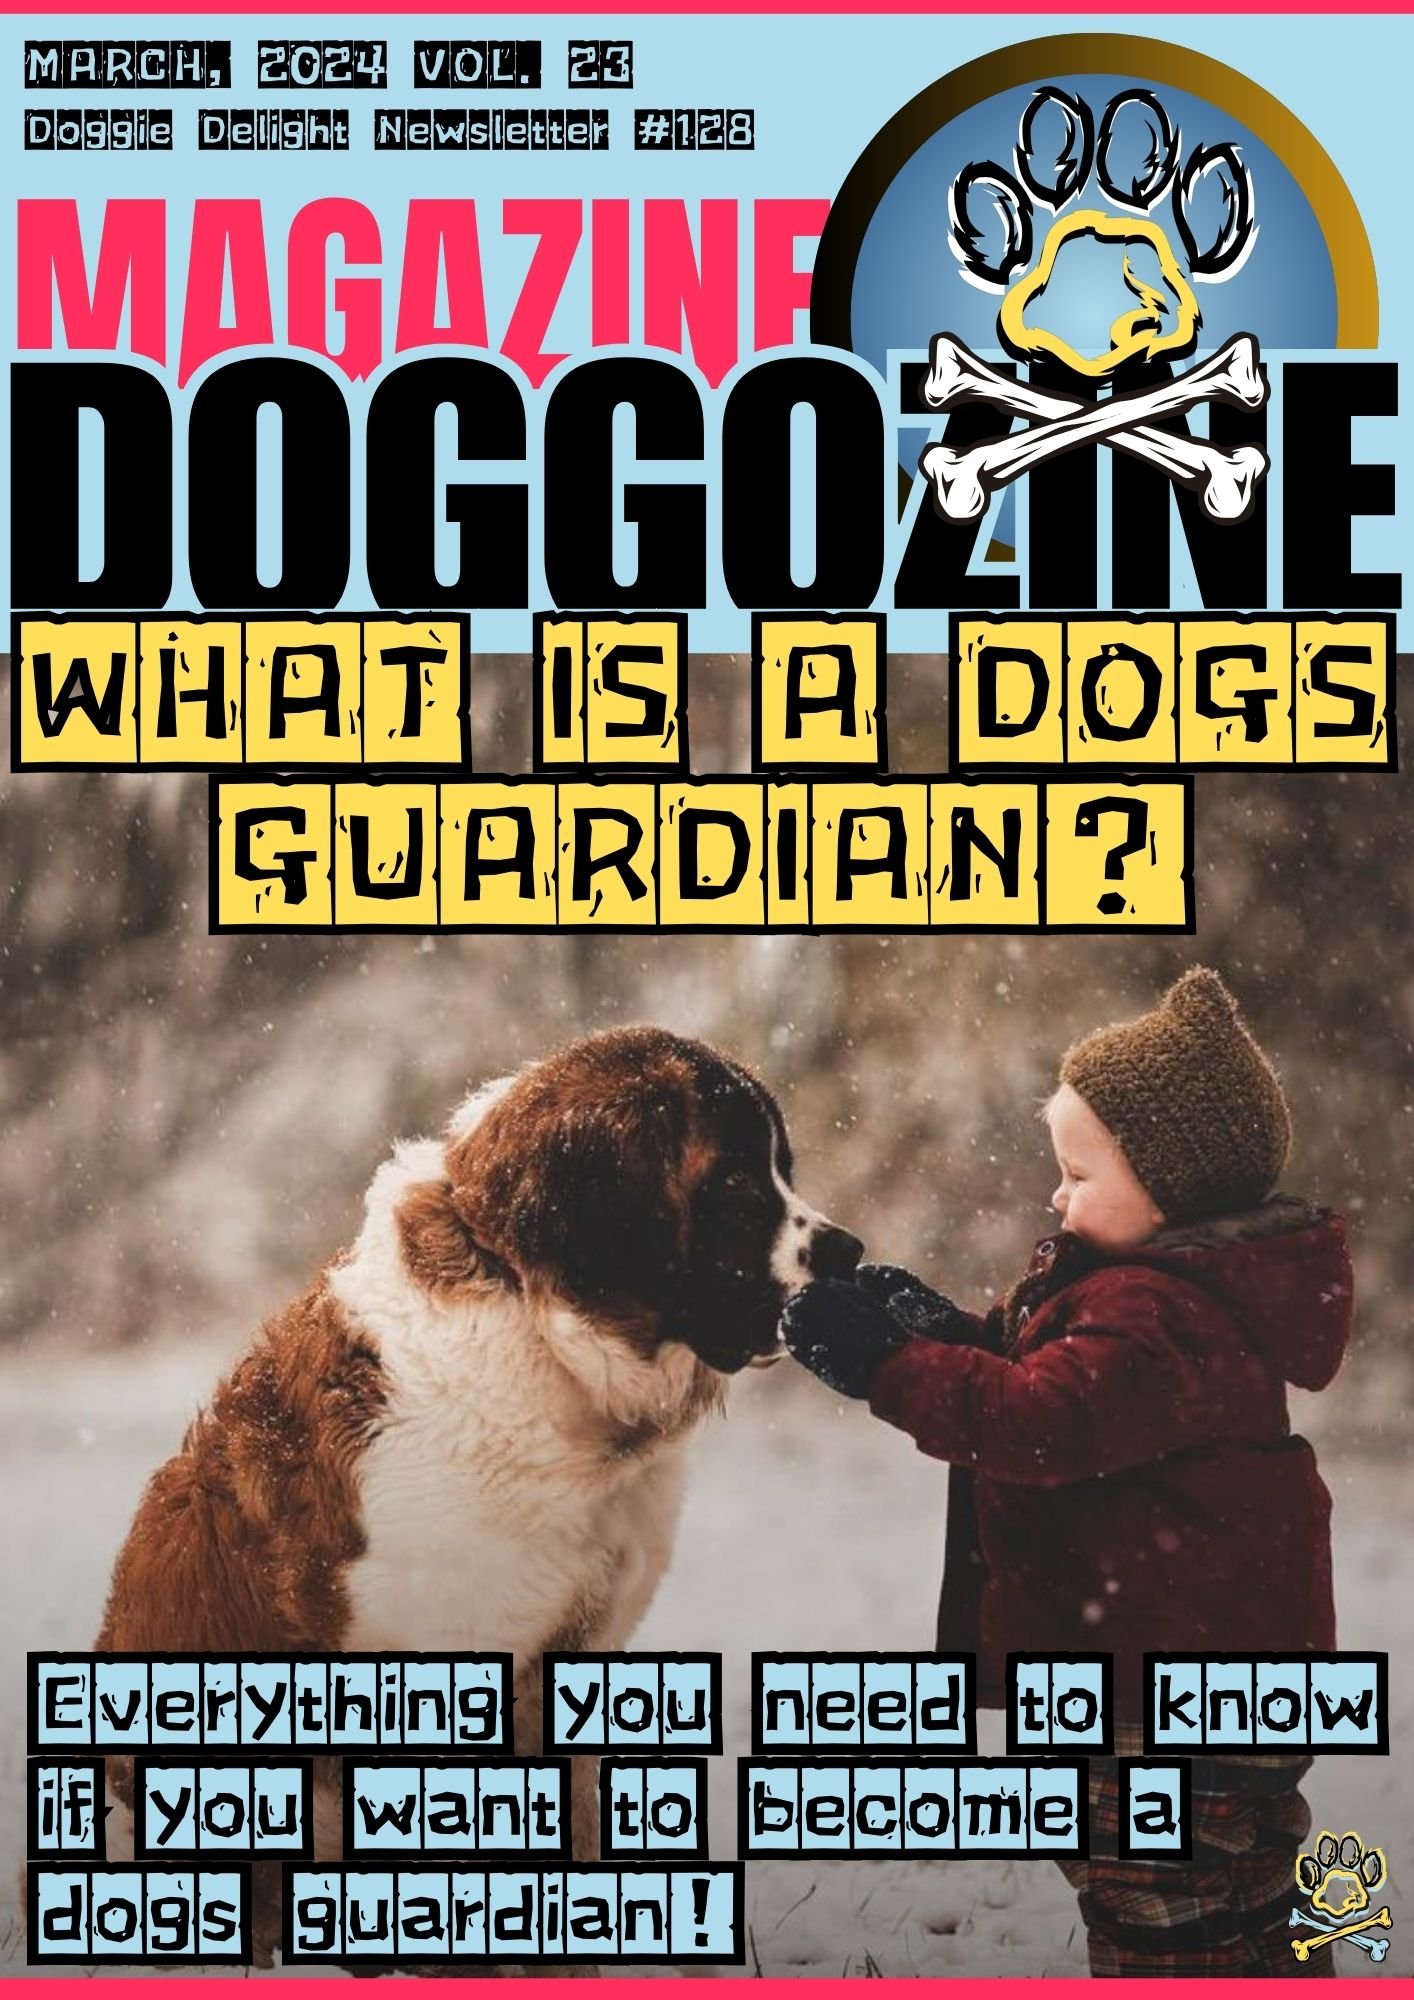 what is a dogs guardian